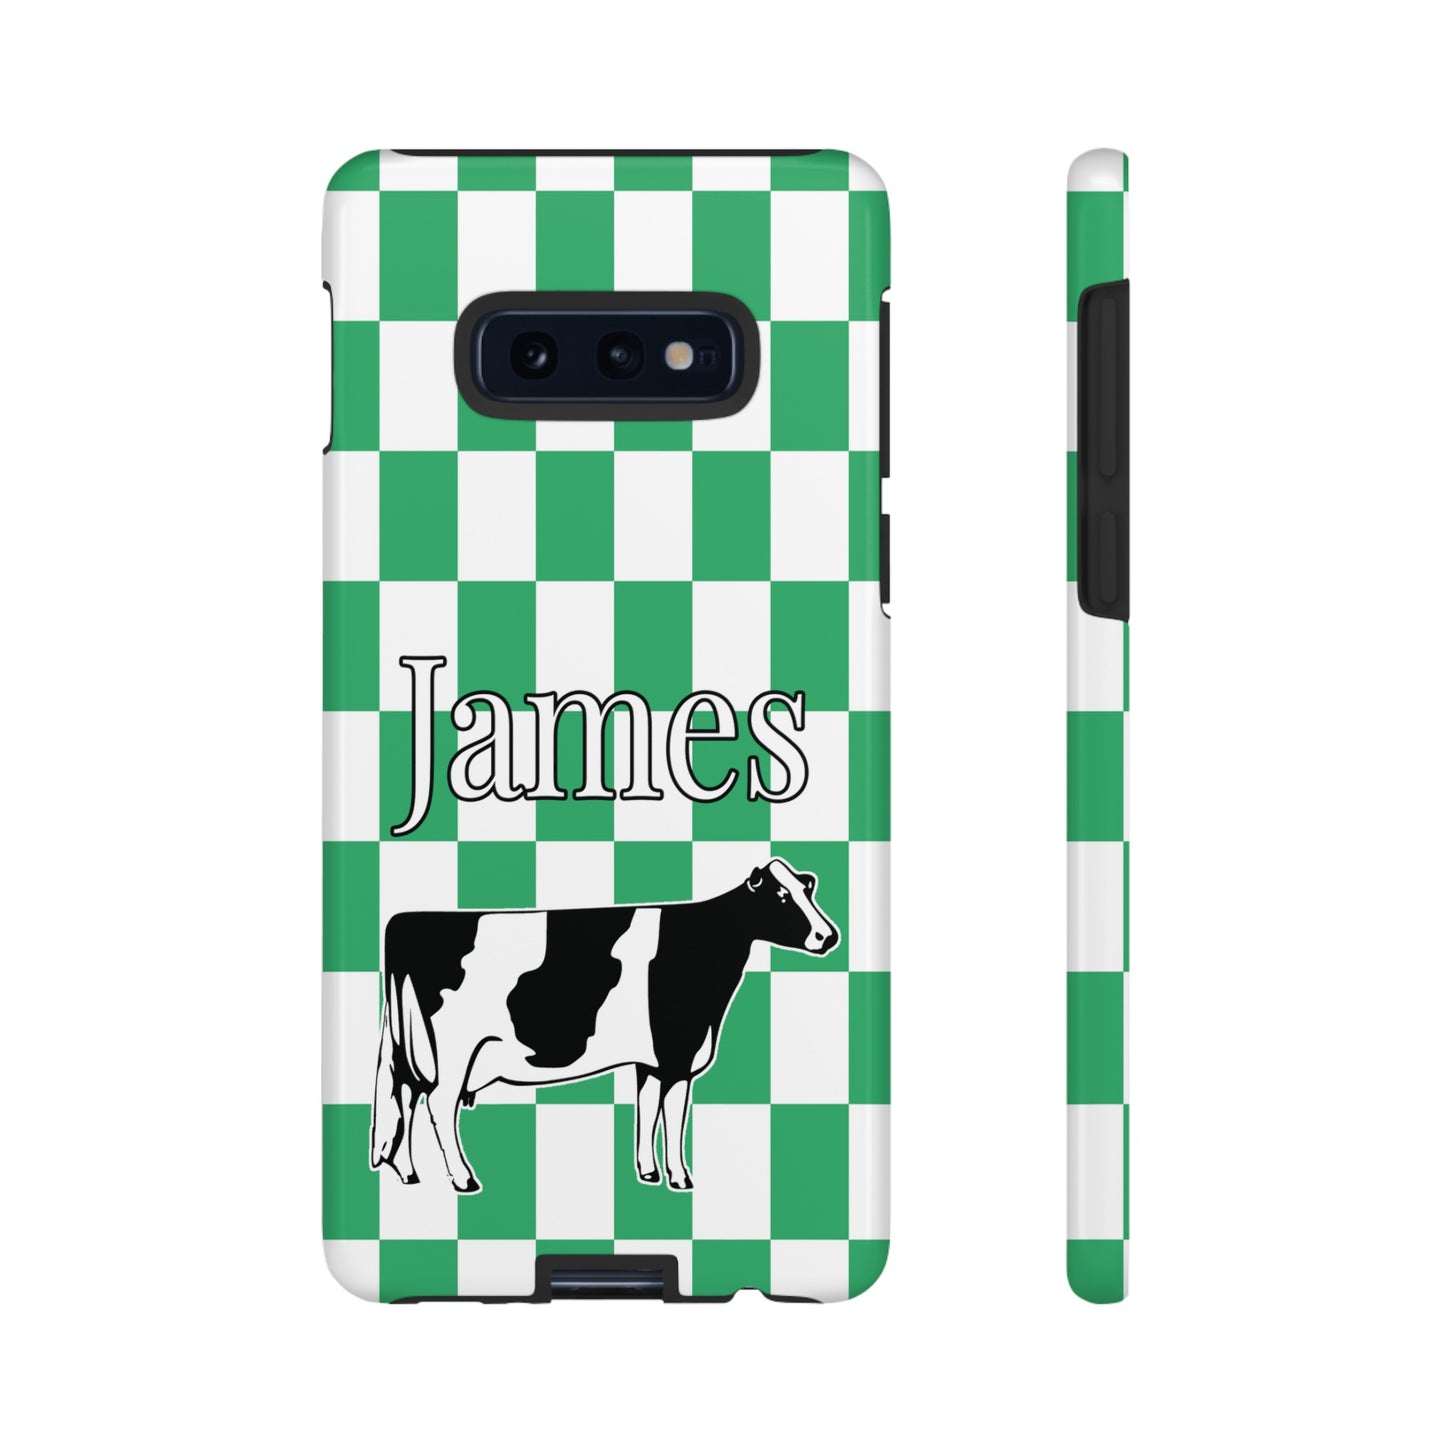 Livestock Show Cow - Livestock Dairy Cow - Android Cow Phone Cases